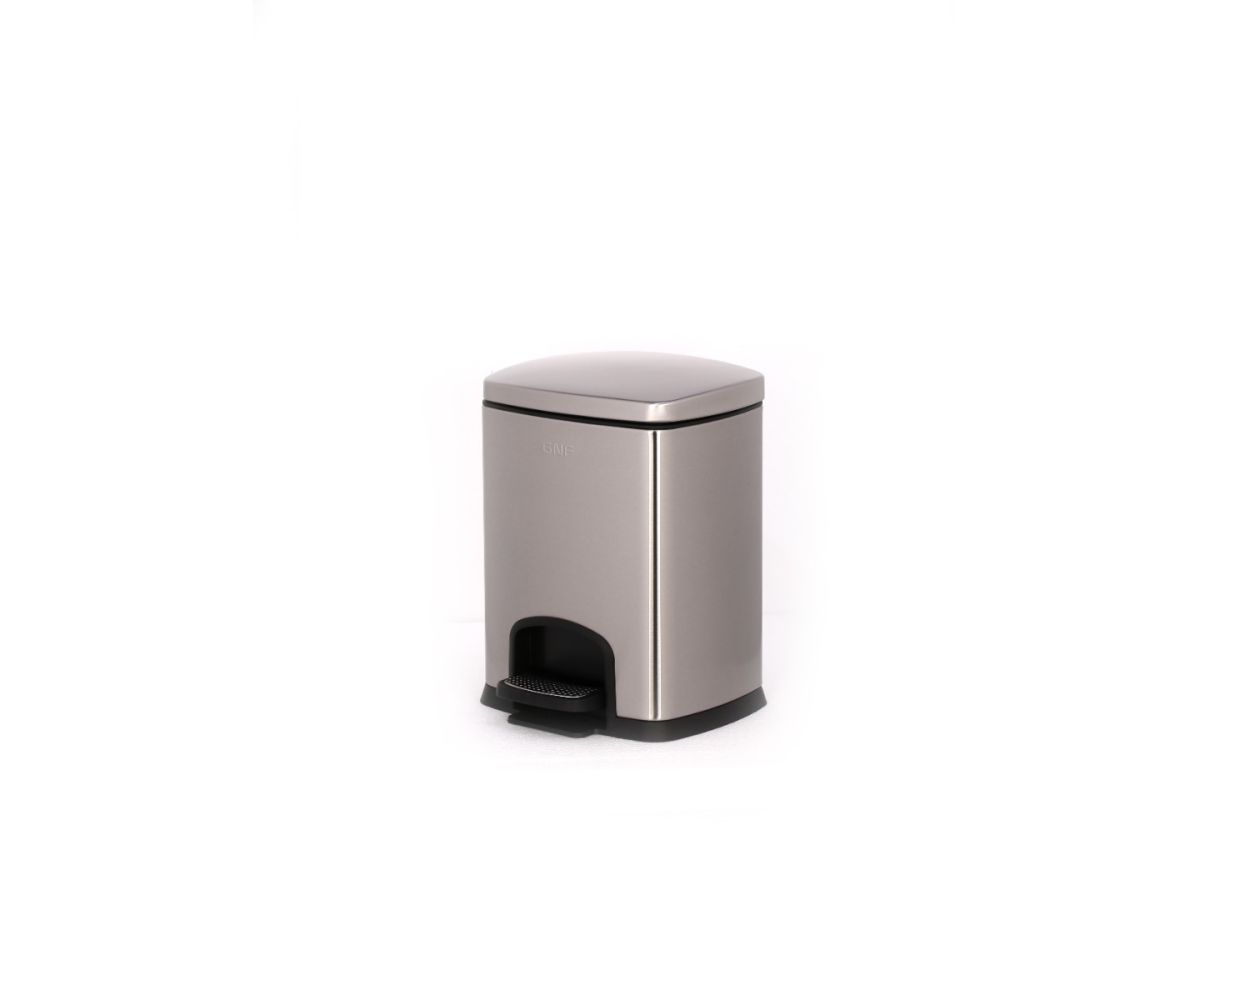 Buy Dust Bin for Home and Office 60L By Stories